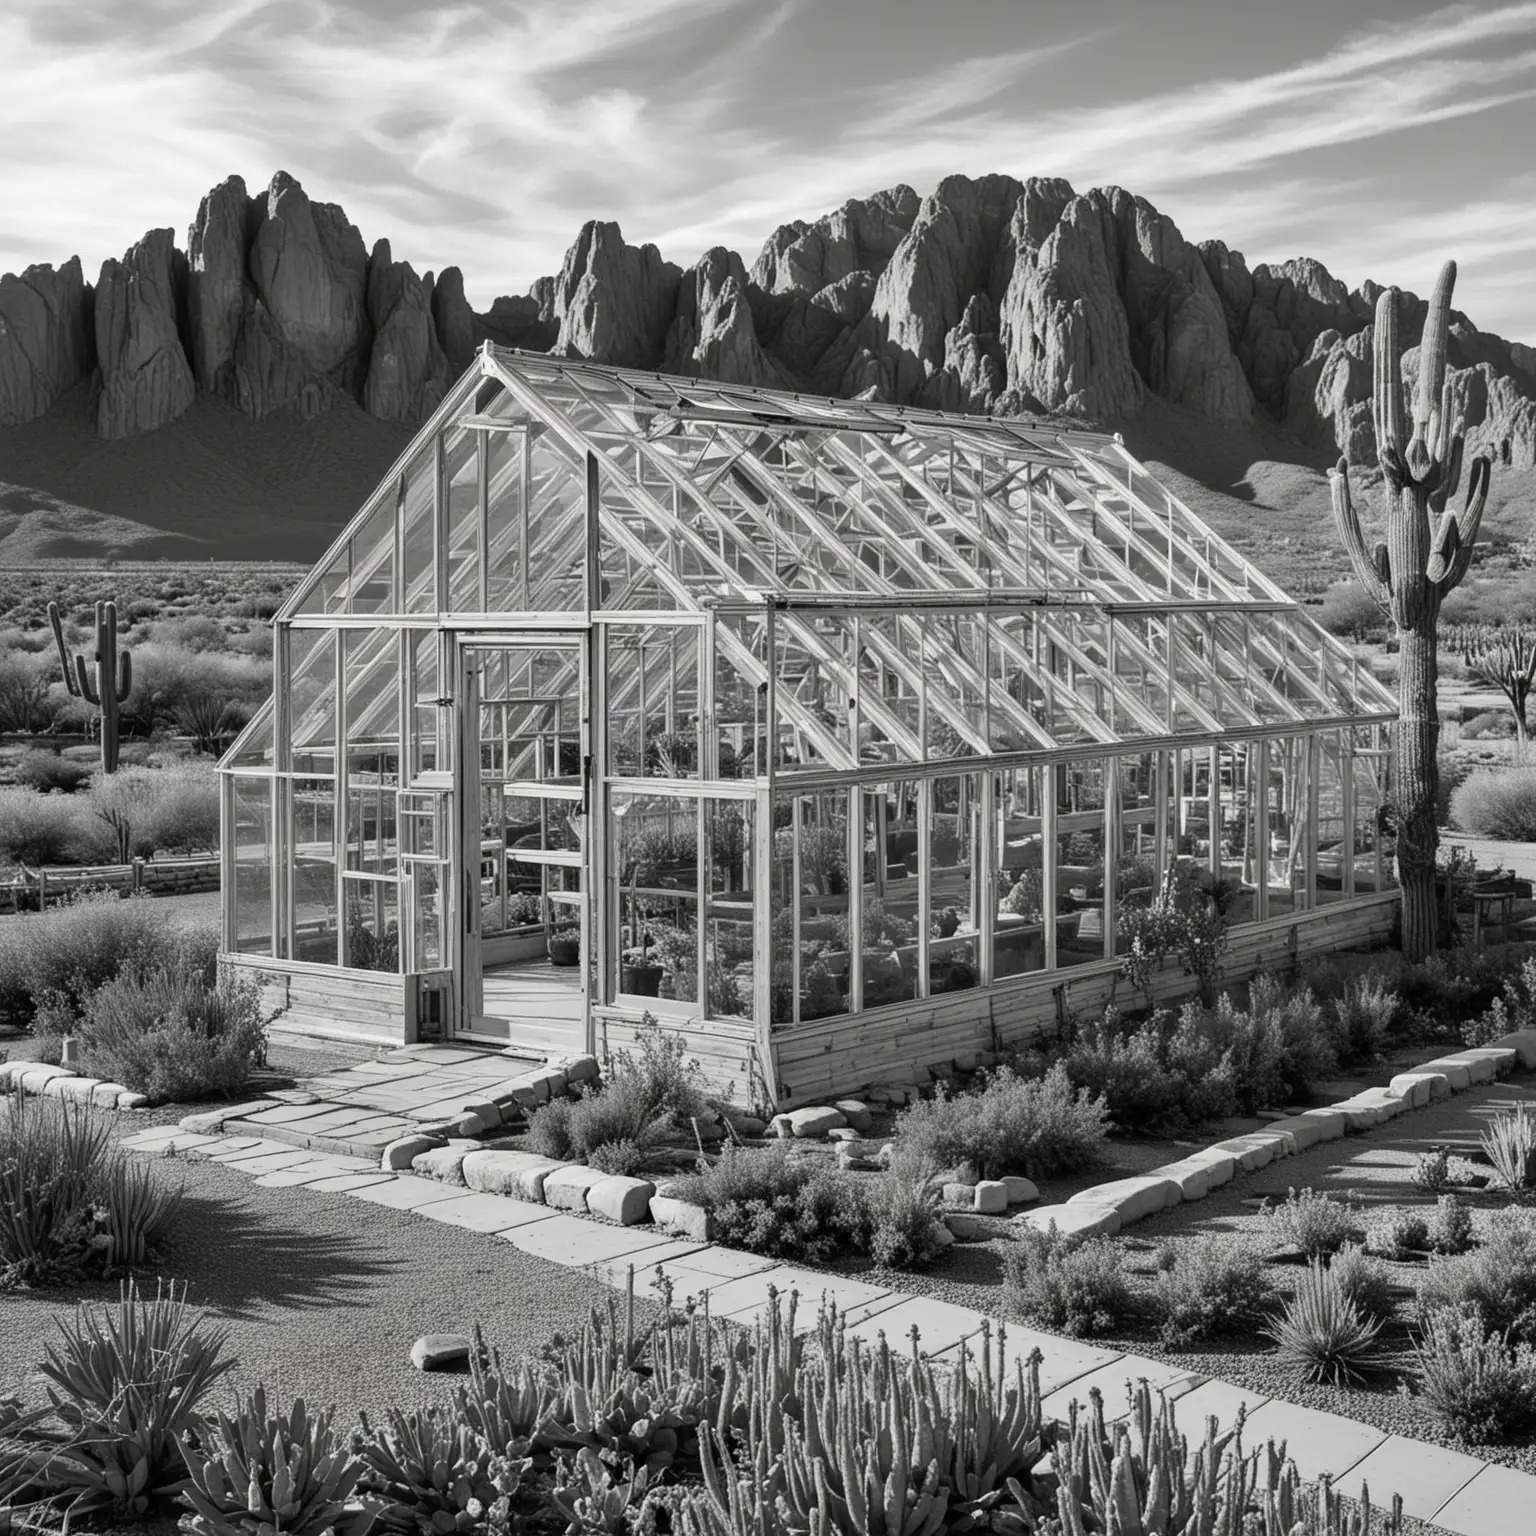 wooden greenhouse, exterior picture, location set in front of superstition mountain in apache junction az, black and white photo, greenhouse is 60 meters long and 10 meters wide, gable roof add more exterior local fauna scattered randomly

